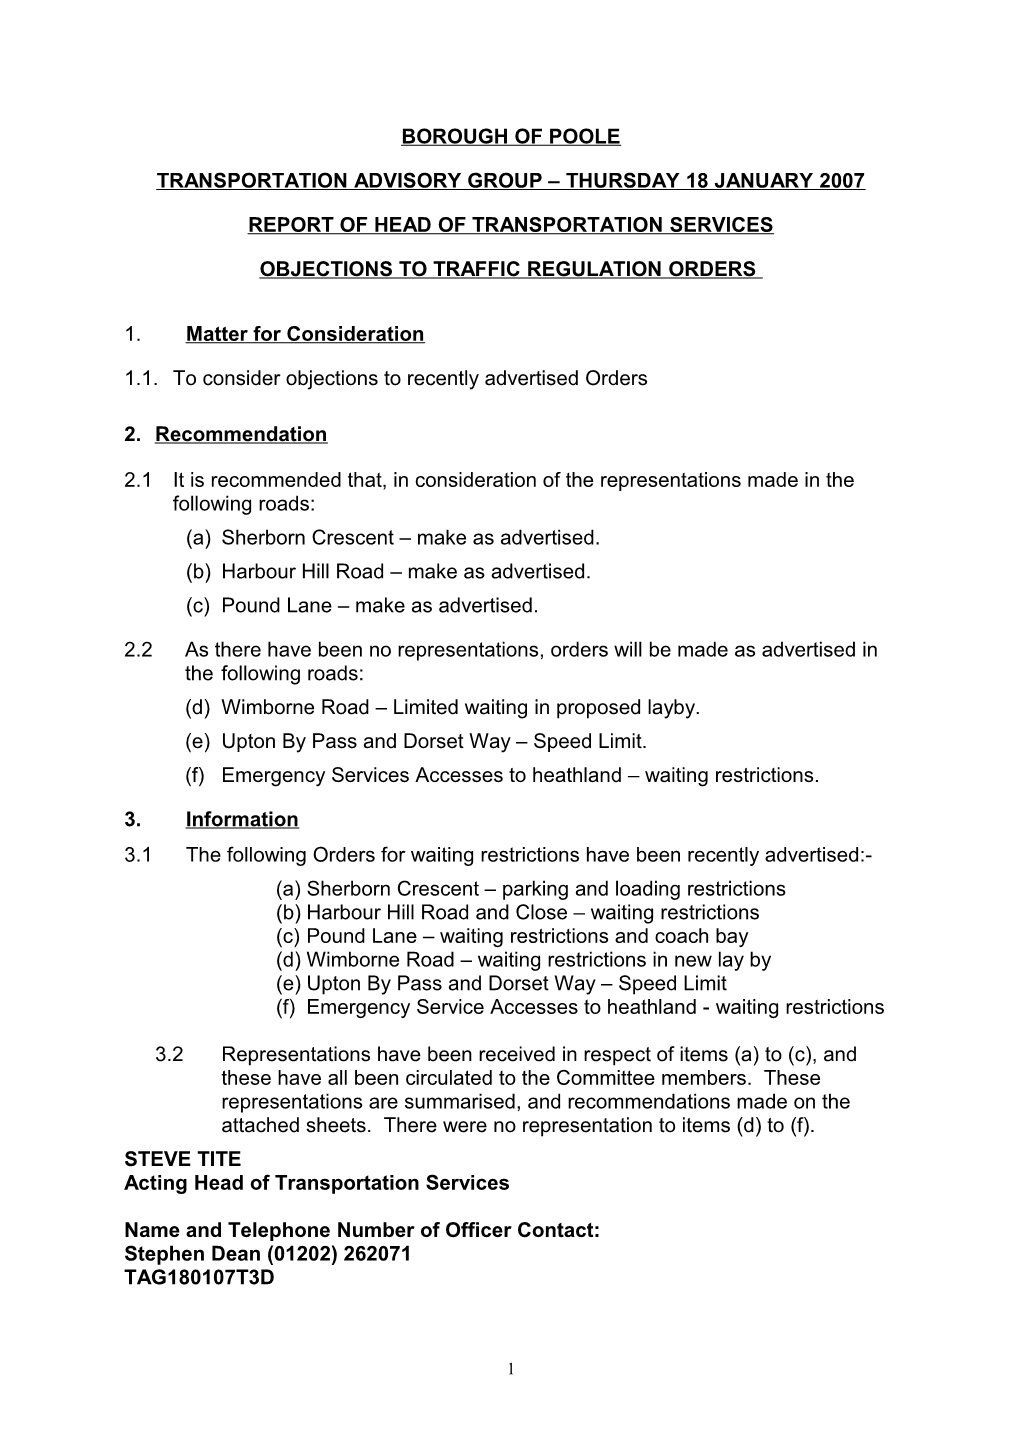 Objections to Traffic Regulation Orders